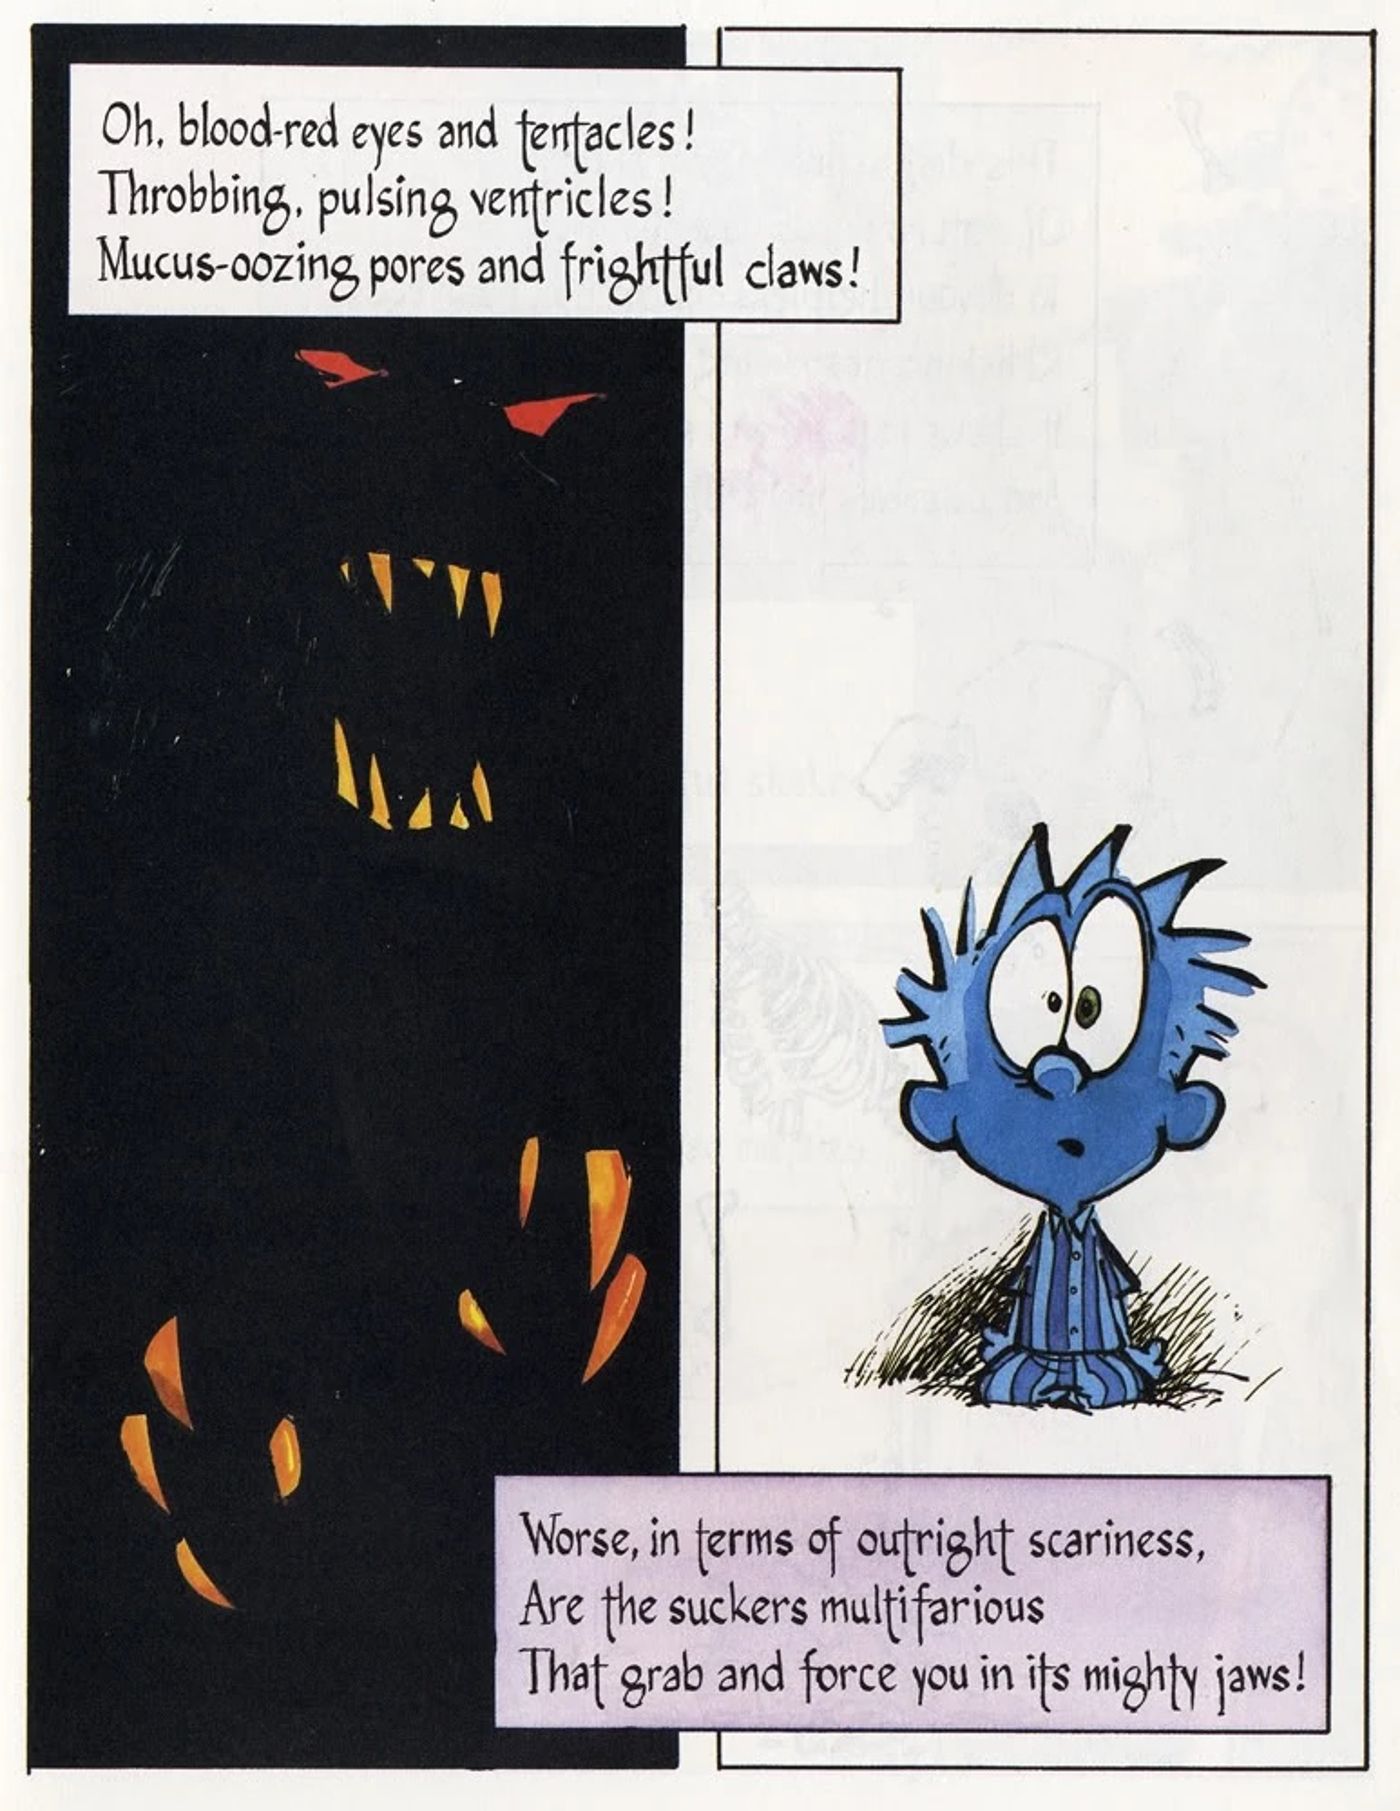 A Nauseous Nocturne from Calvin & Hobbes